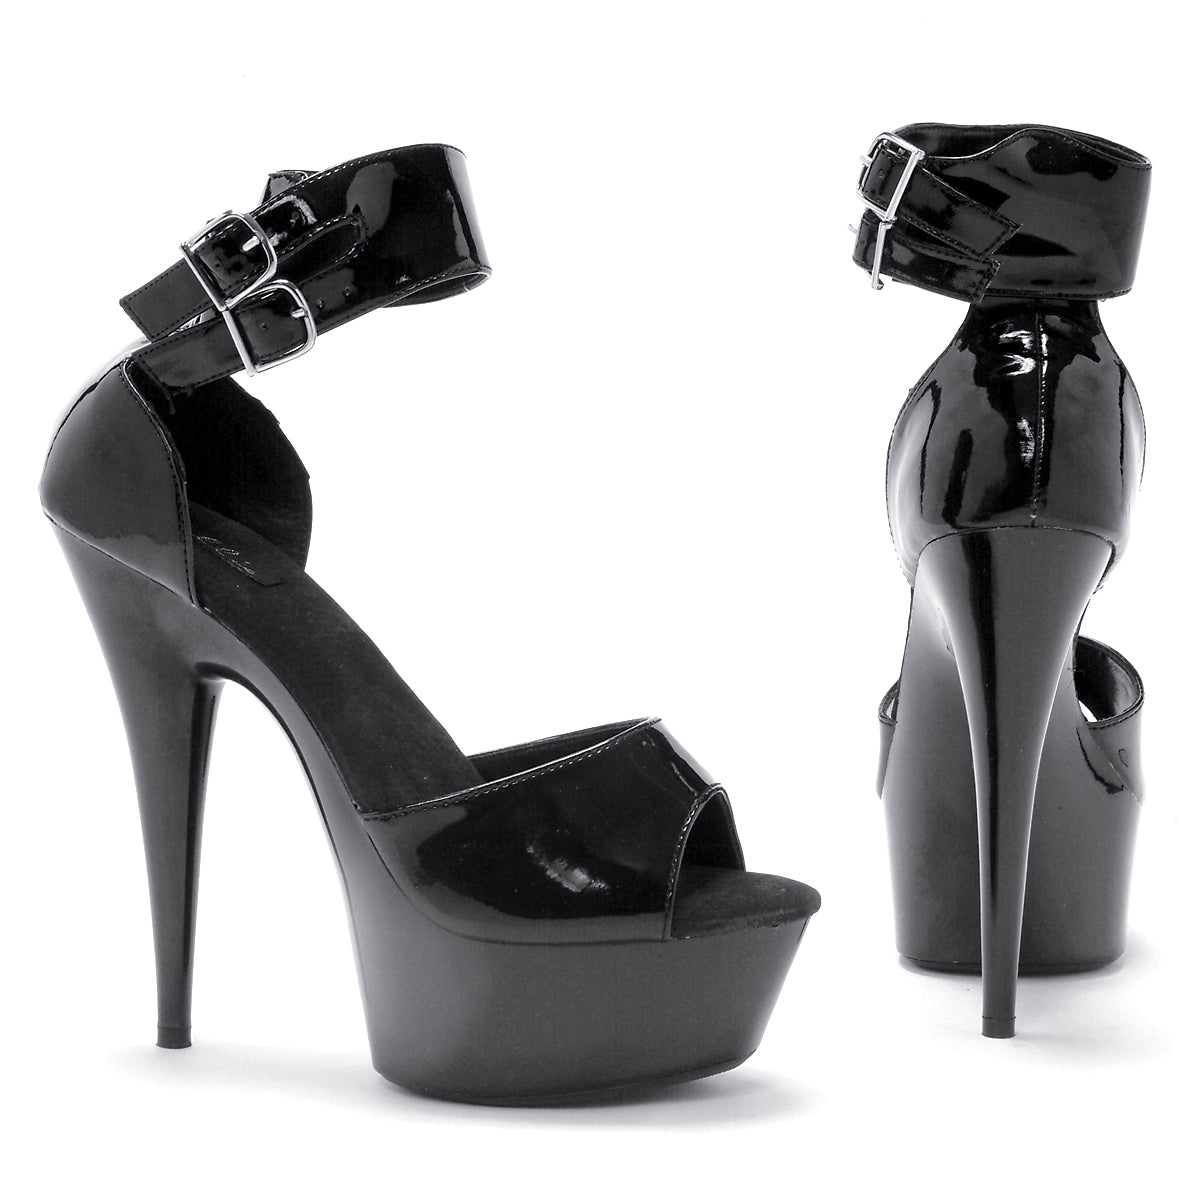 6 PEEPTOE PLATFORM WITH DOUBLE STRAP CUFF DETAIL